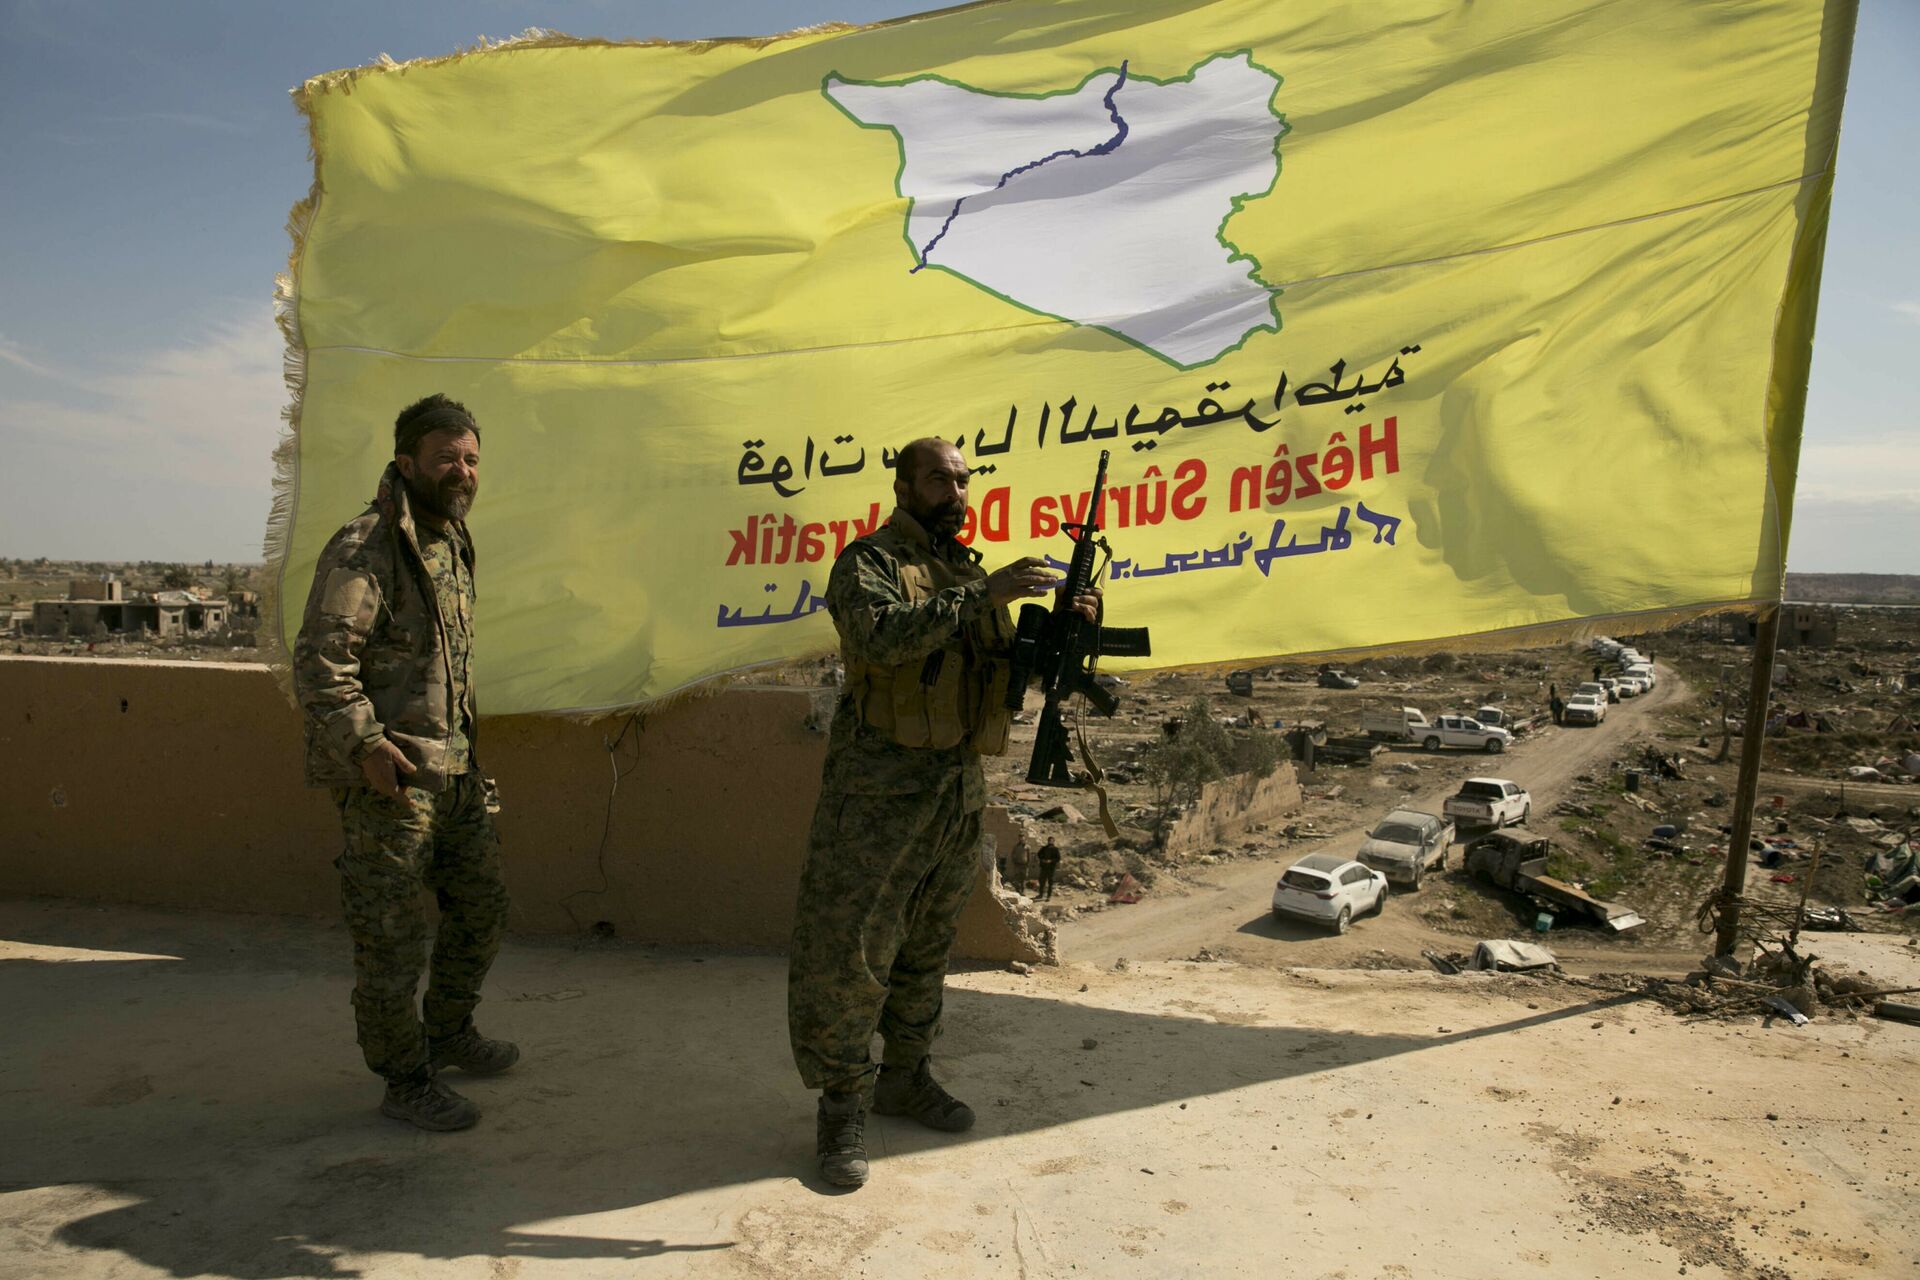 U.S.-backed Syrian Democratic Forces (SDF) fighters pose for a photo on a rooftop overlooking Baghouz, Syria, after the SDF declared the area free of Islamic State militants after months of fighting on Saturday, March 23, 2019 - Sputnik International, 1920, 21.07.2022